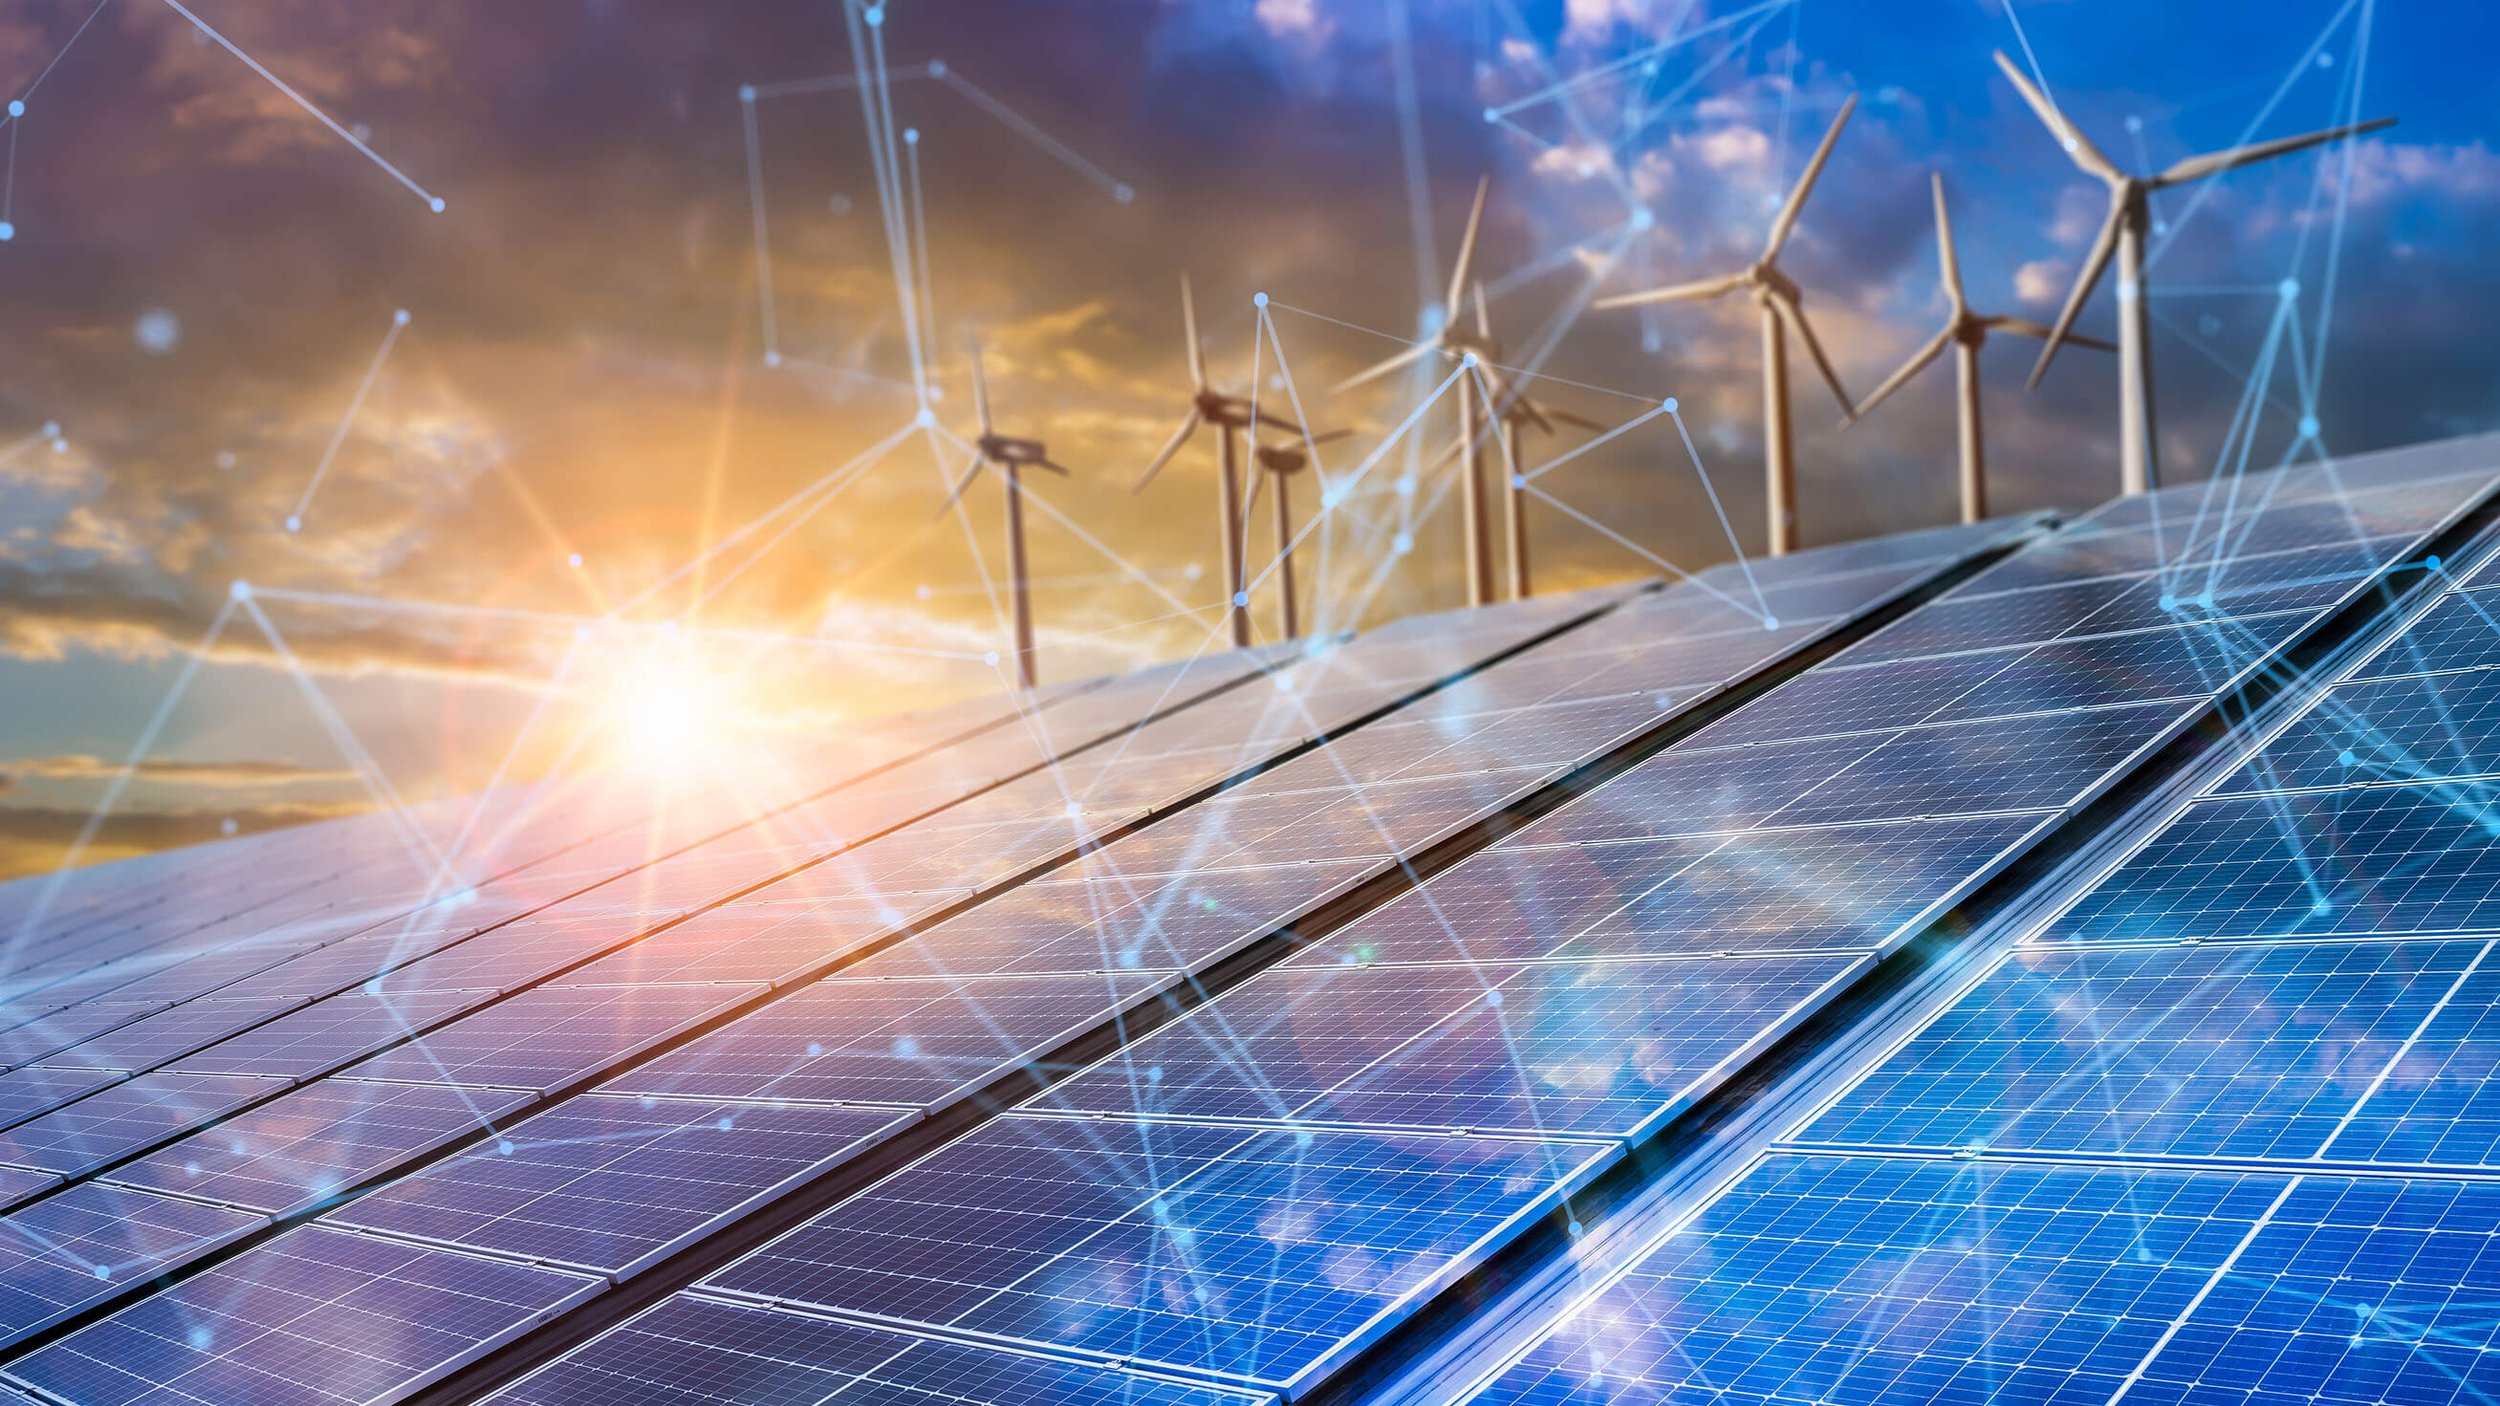   Grid Software &amp;    Modernization   Empowering smart grid, grid software, and modernization solutions through cutting-edge and domain-specific marketing services.   LEARN MORE  